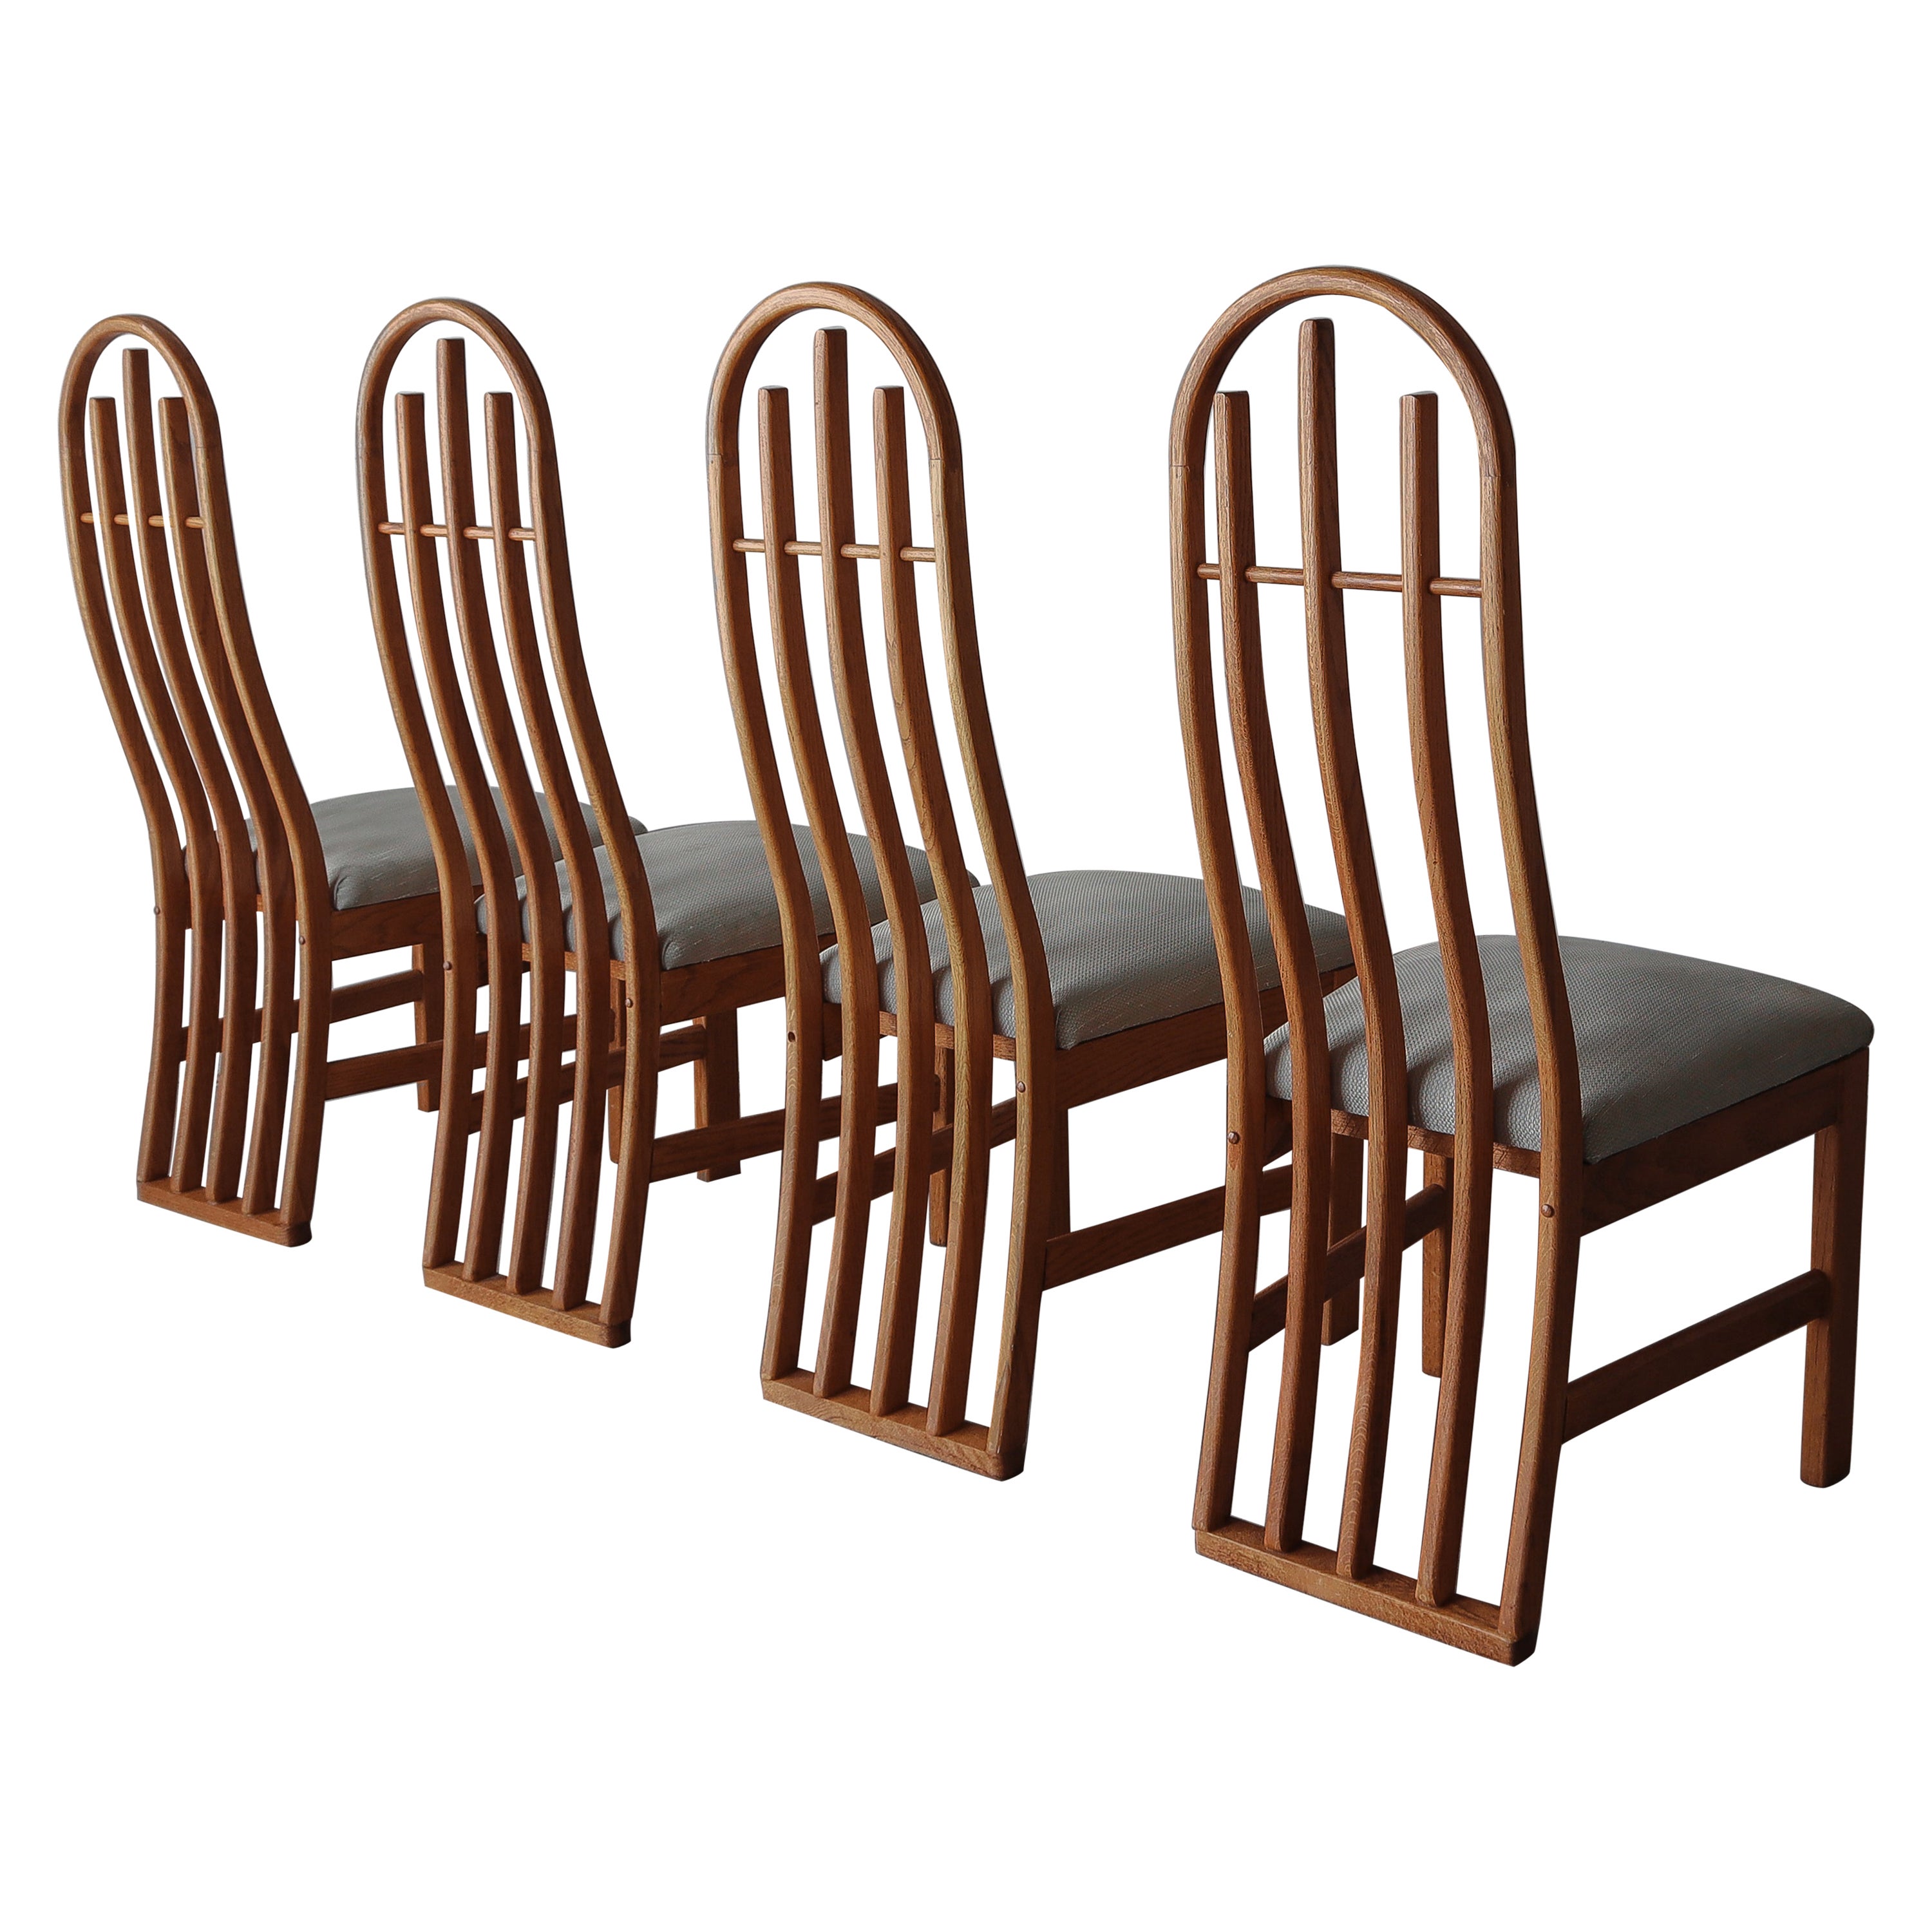 Set of 4 Architectural Oak Dining Chairs